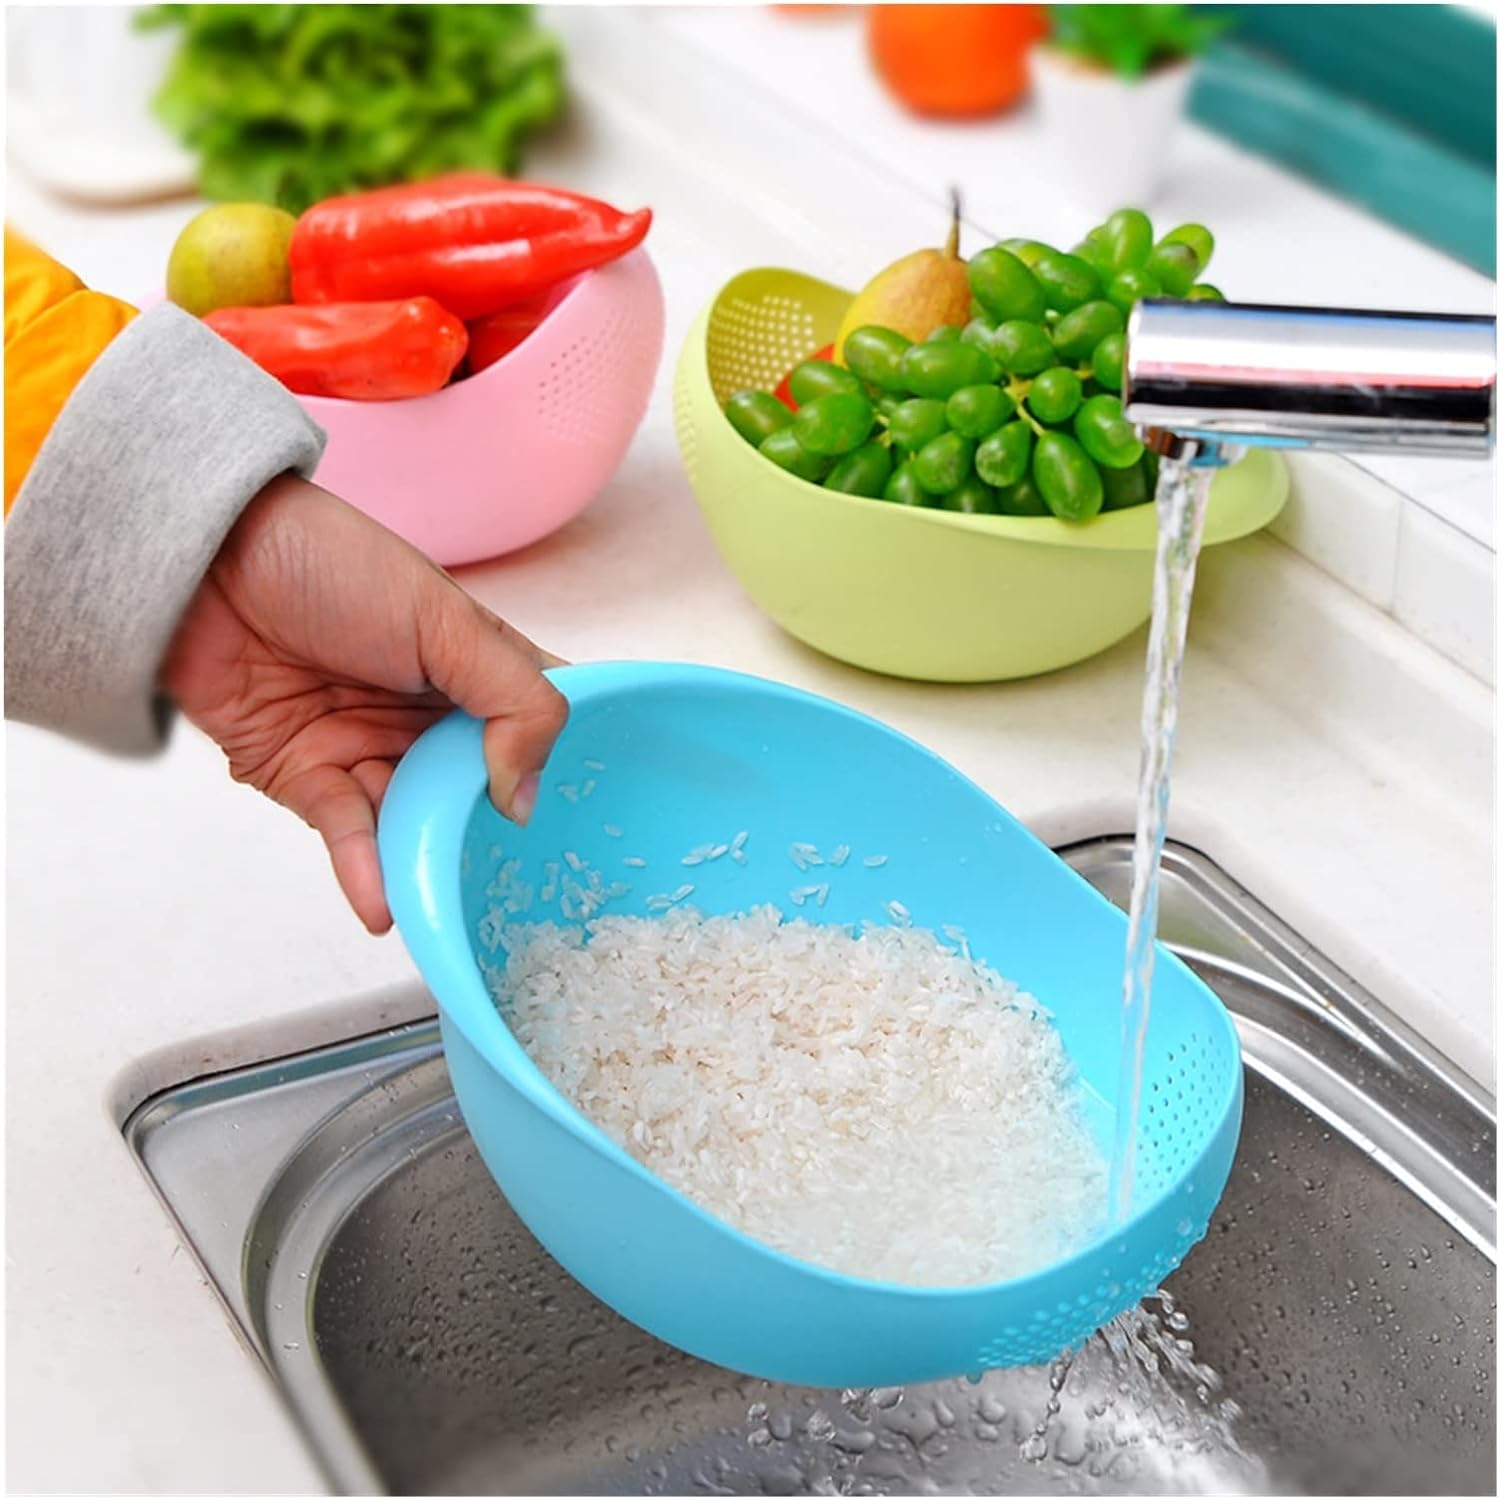 Rice being washed with the help of Plastic Rice Washing Strainer Basket and image also displays another two pieces of Plastic Rice Washing Strainer Baskets with fruits and vegetables kept in it